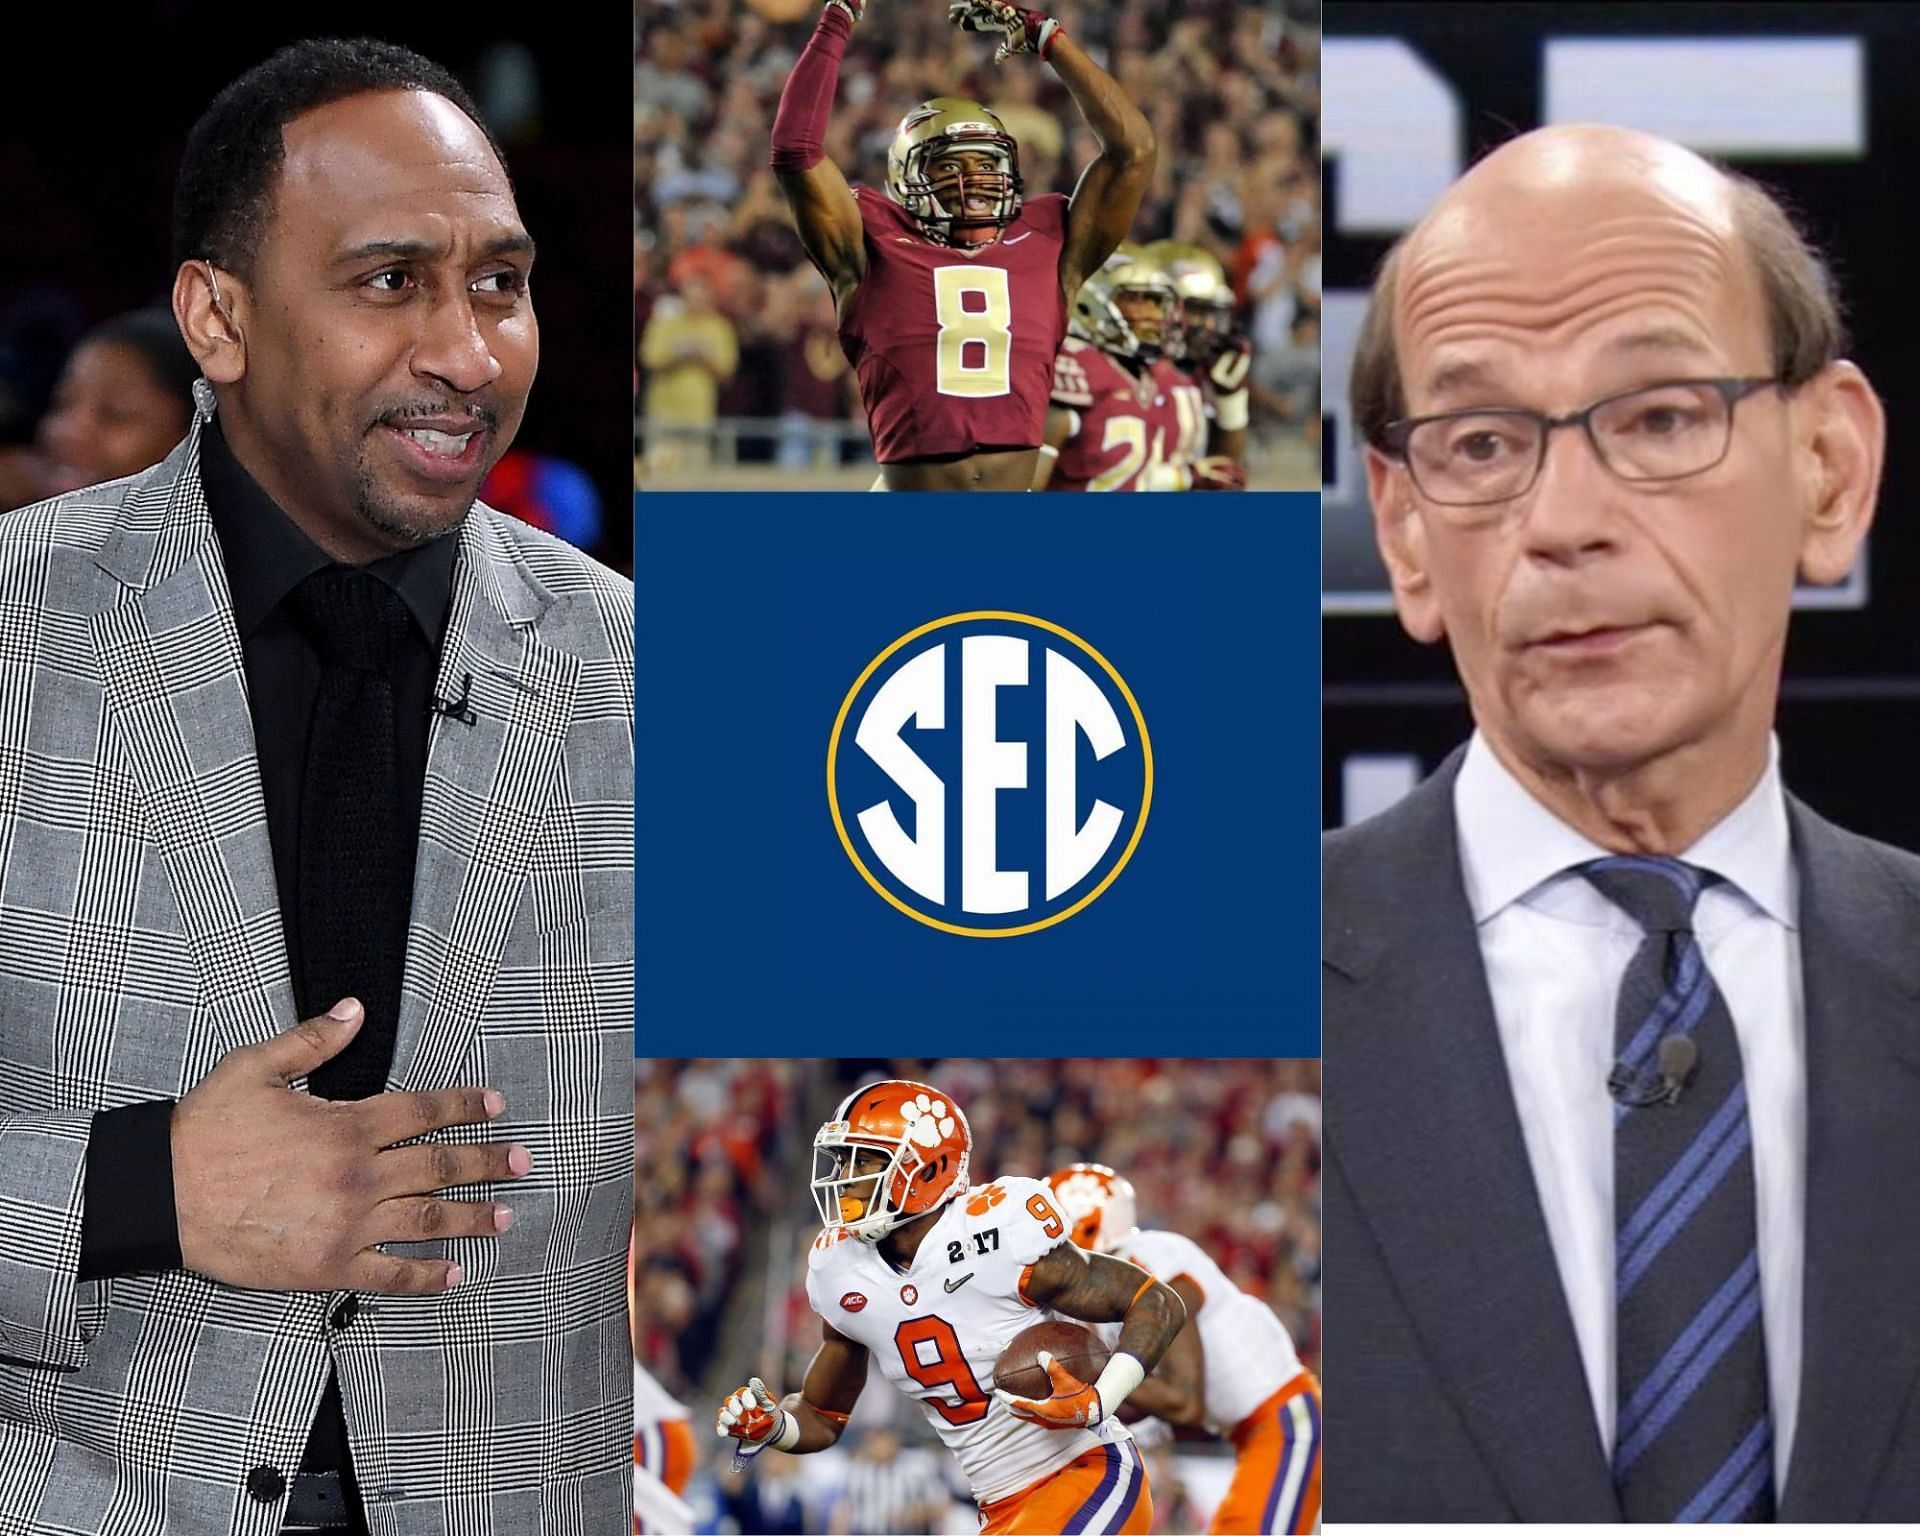 Stephen A Smith and Paul Finebaum talk about FSU and Clemson to SEC